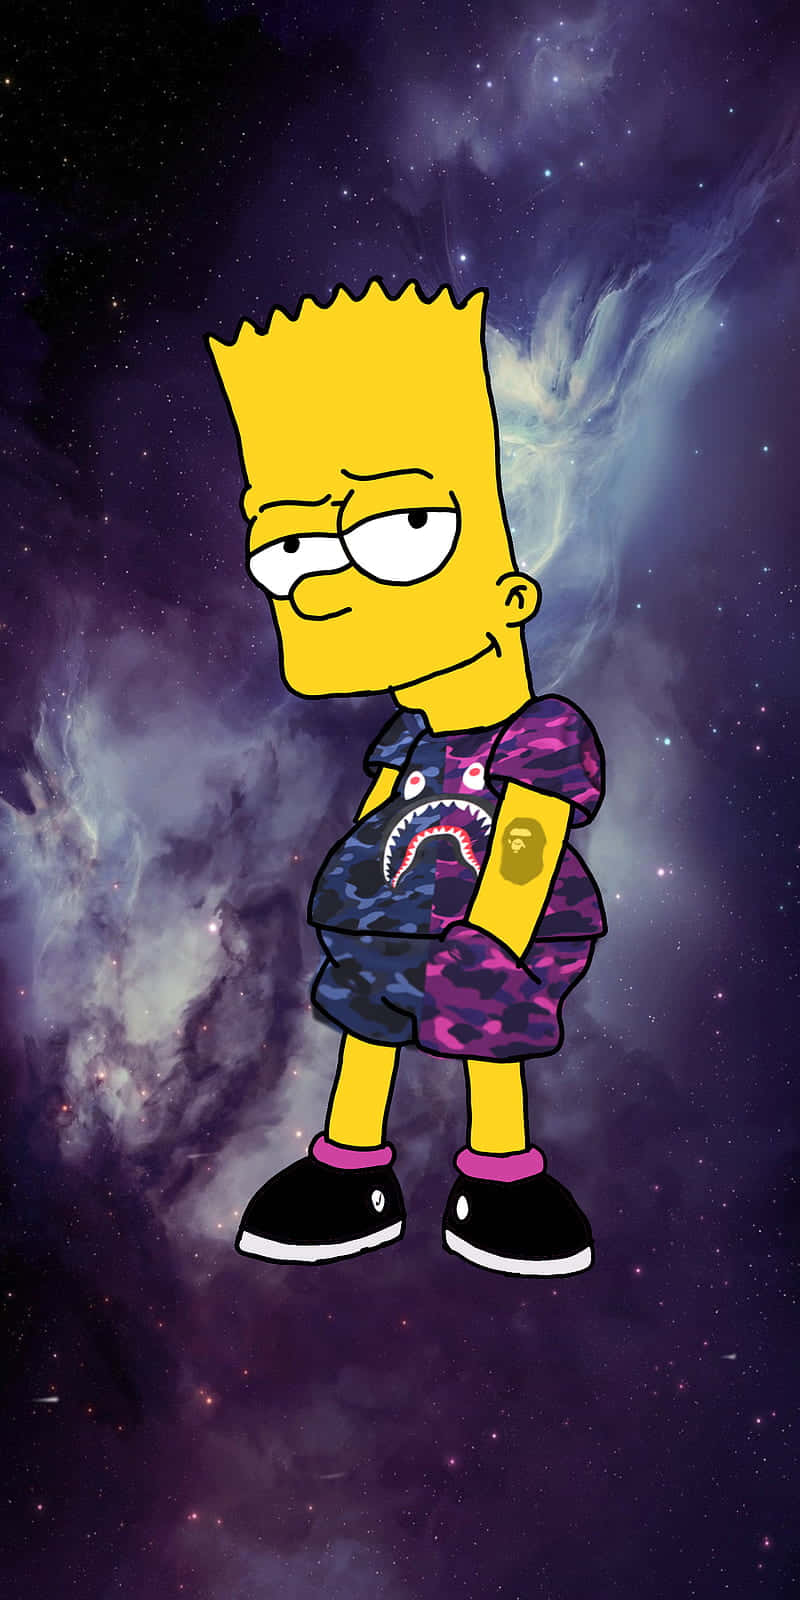 Homer Simpson stays fresh in the 'Dope Simpsons' world. Wallpaper